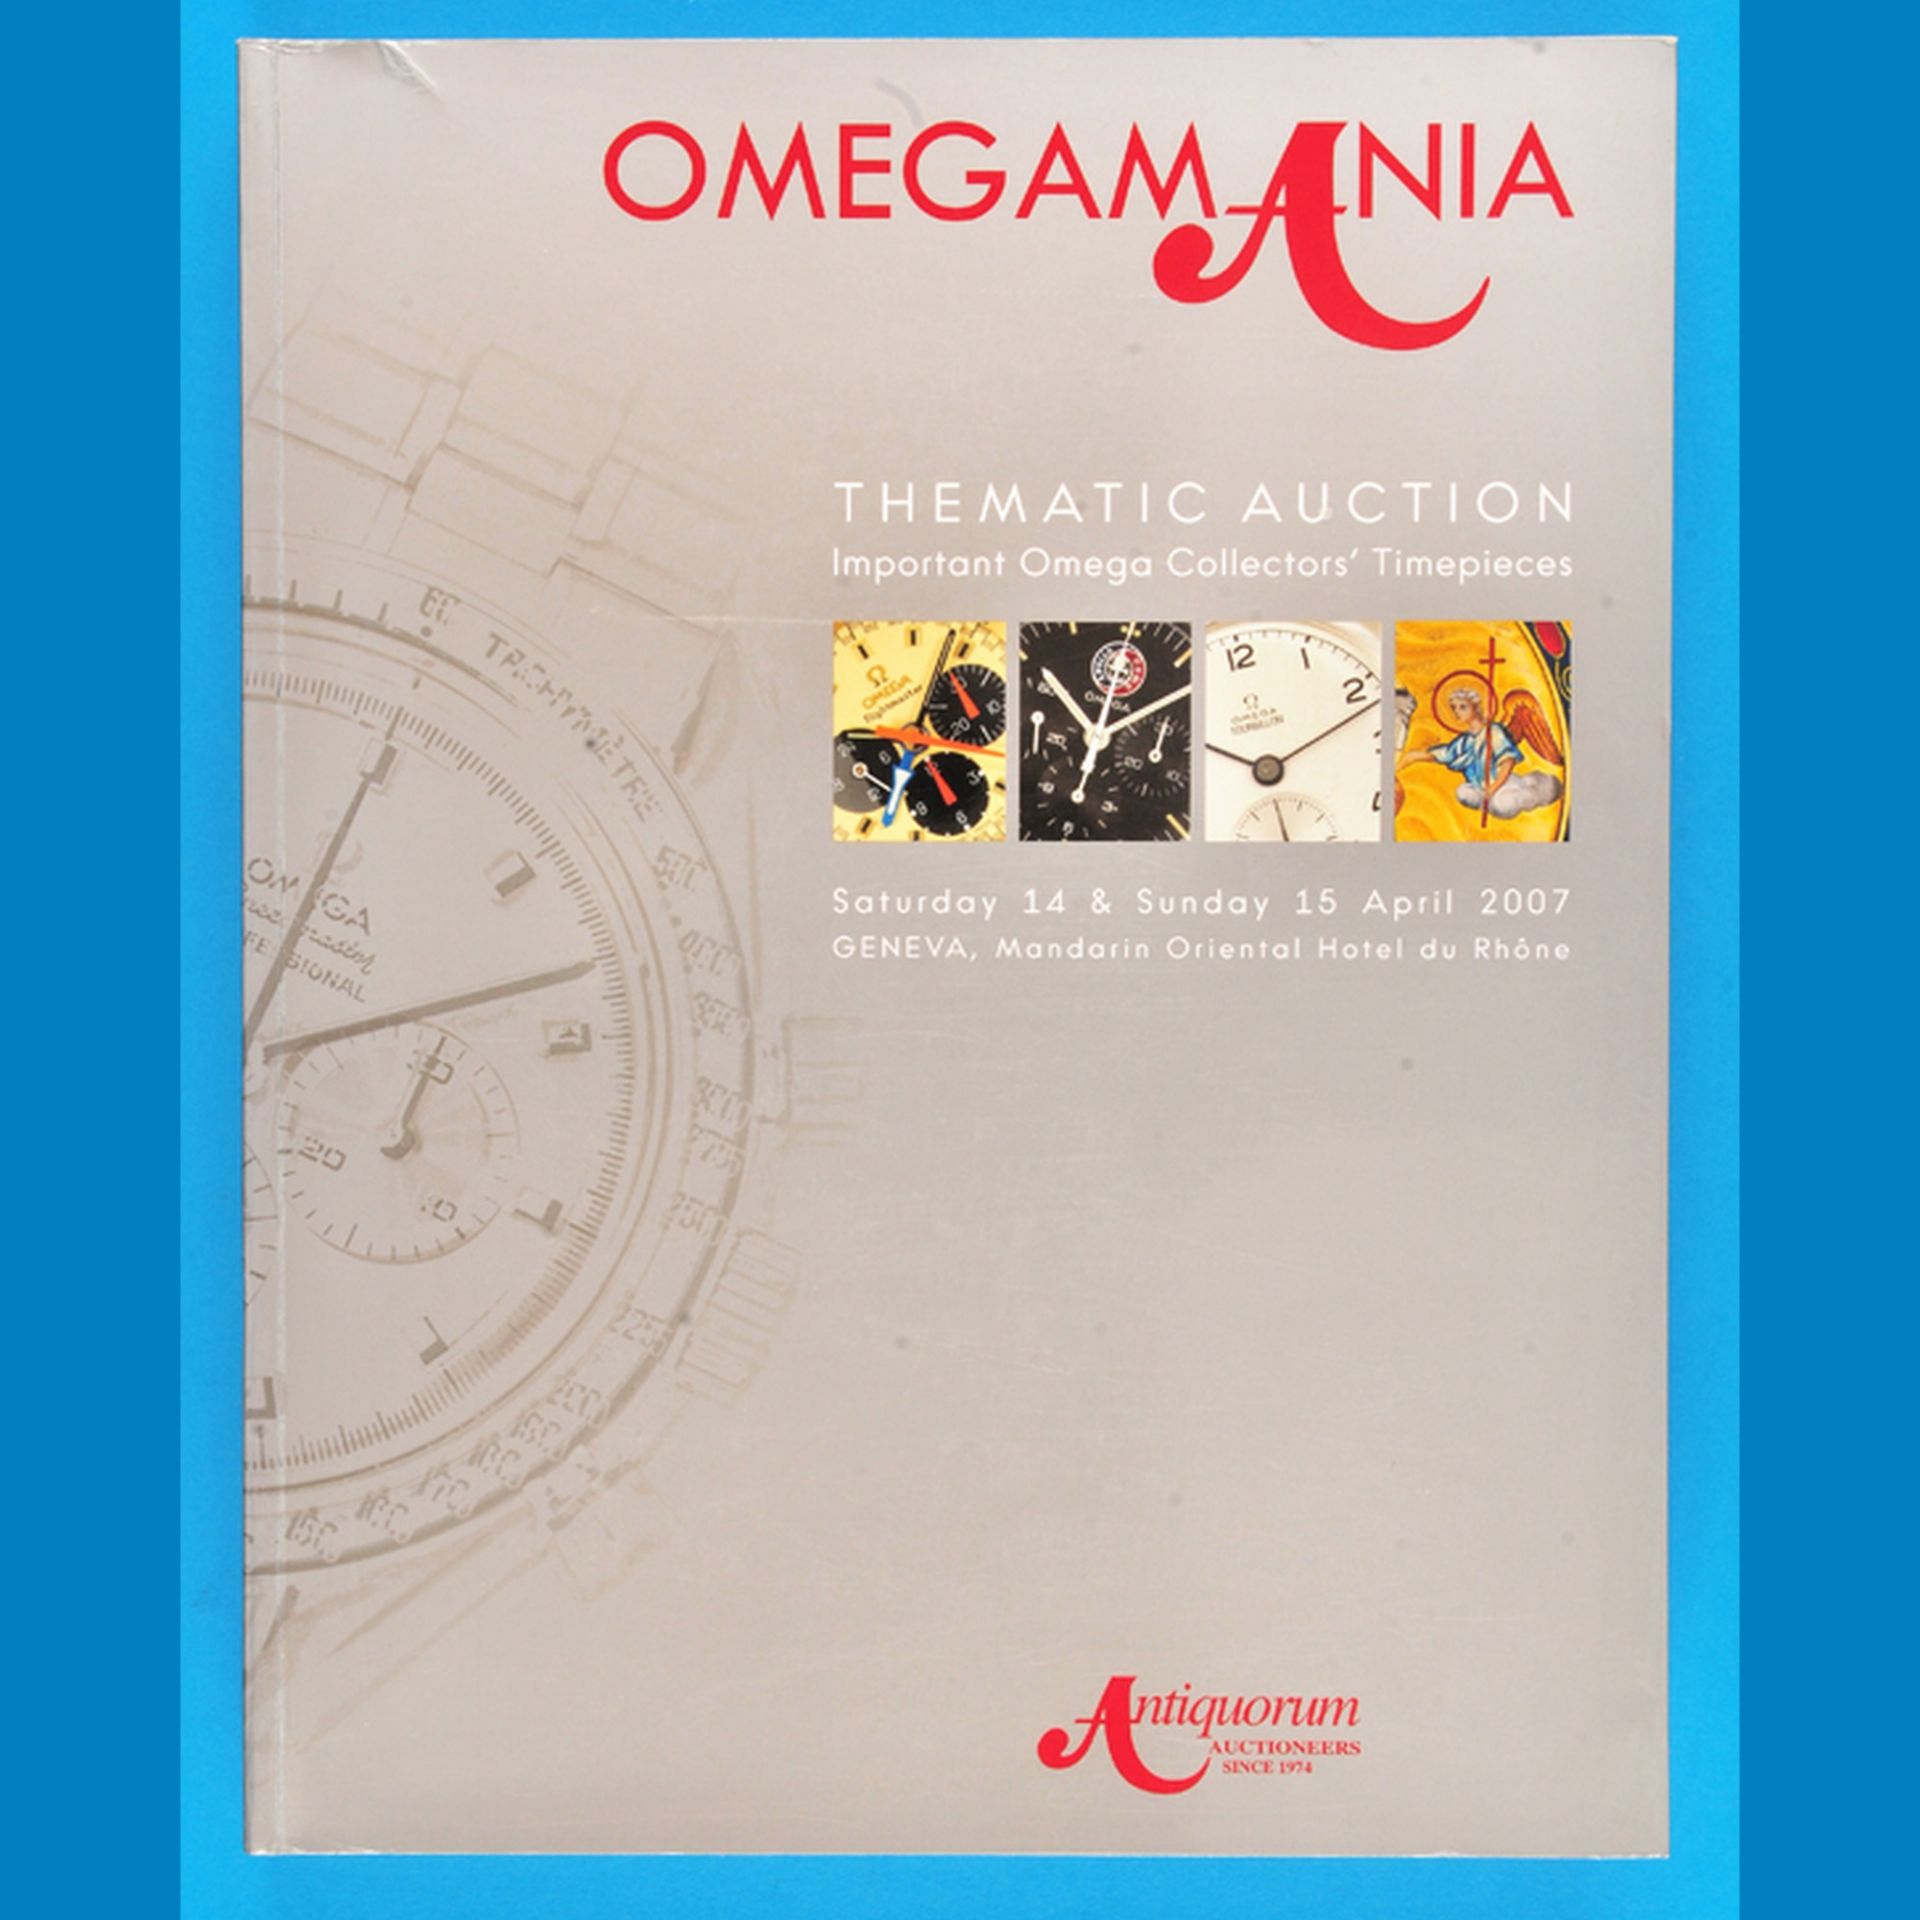 Antiquorum, Omegamania, Thematic Auction, Important Omega Collectors‘ Timepieces, 2007